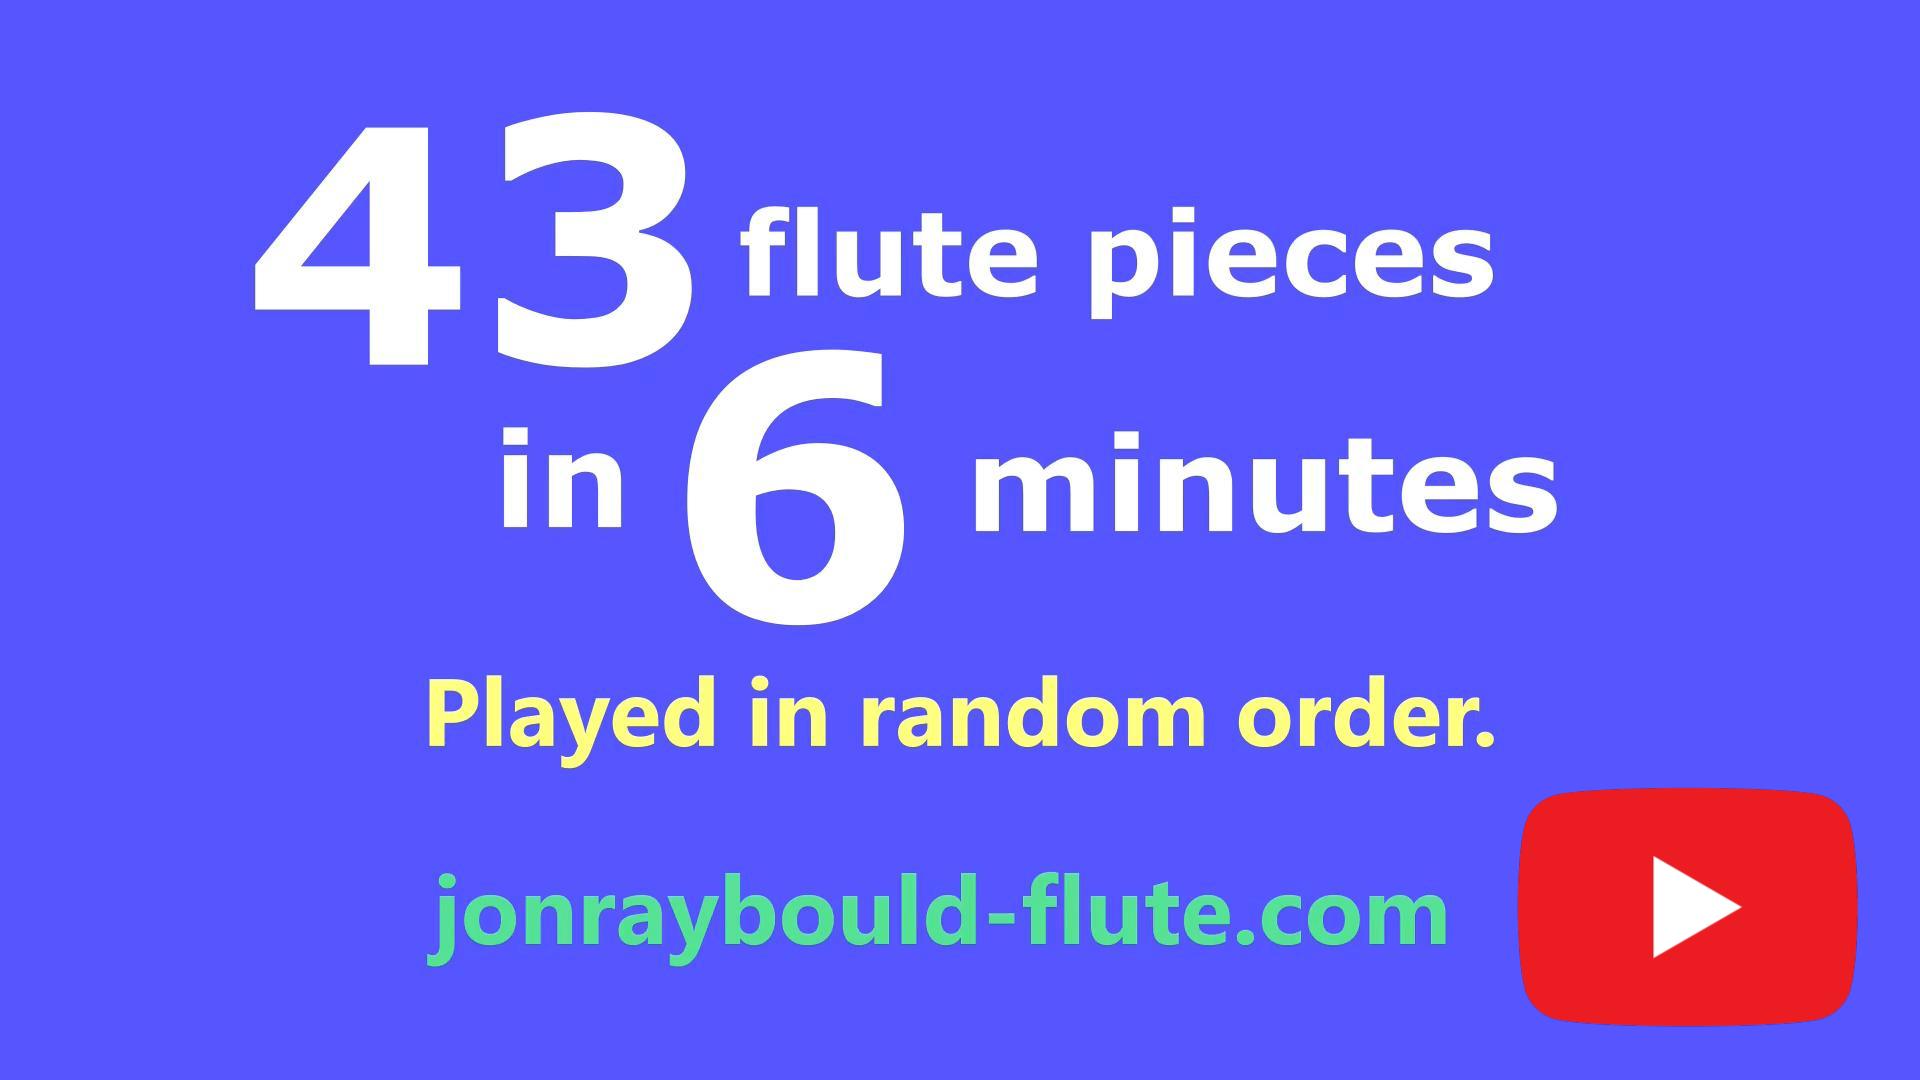 43 flute pieces in 6 minutes (video)